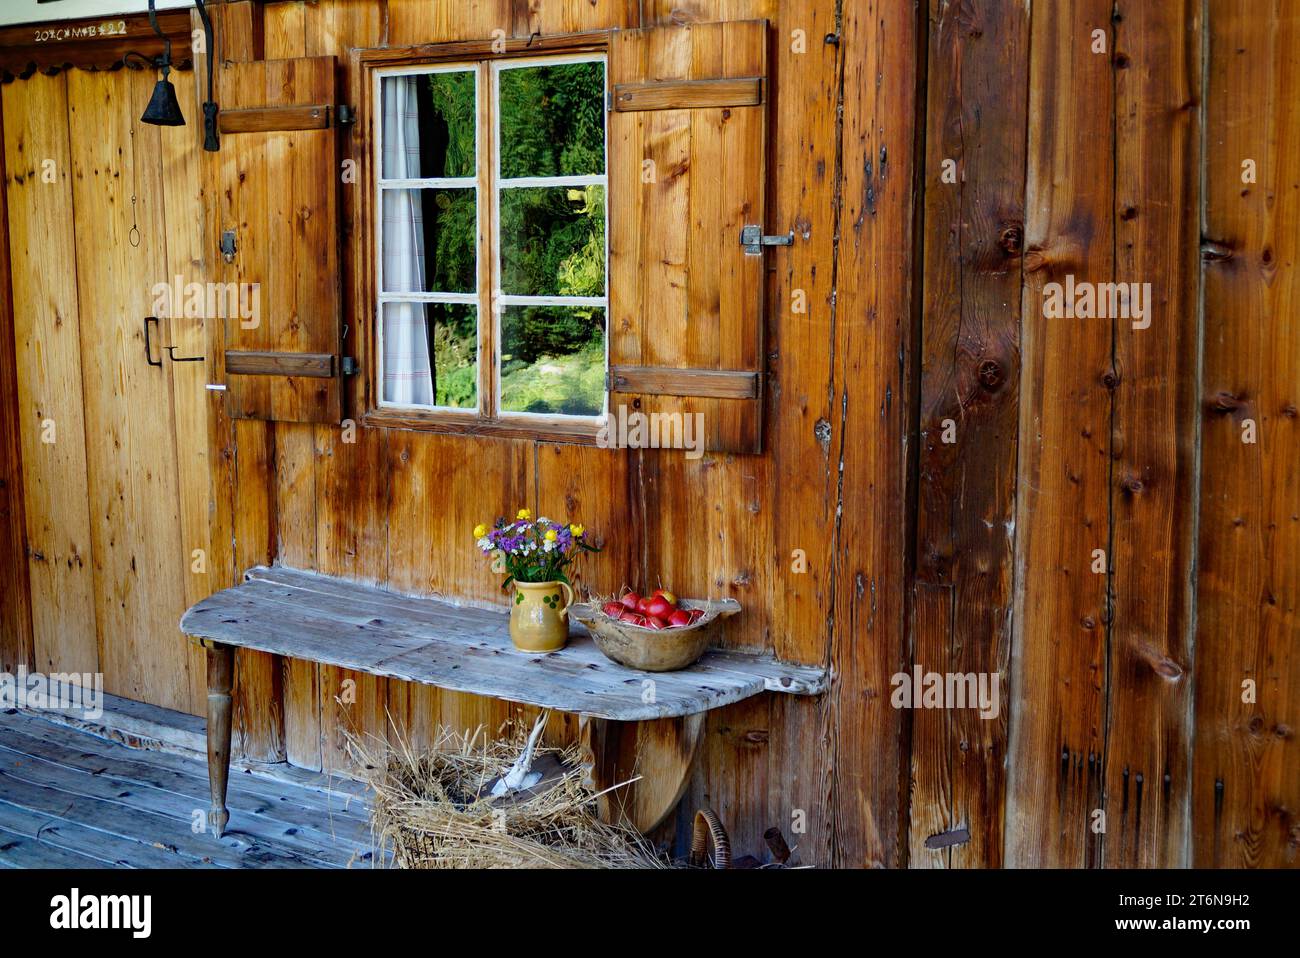 rustic countryside scenery with an old yellow vase with field flowers and red apples in the basket on the wooden bench in Bavarian village Schwangau Stock Photo